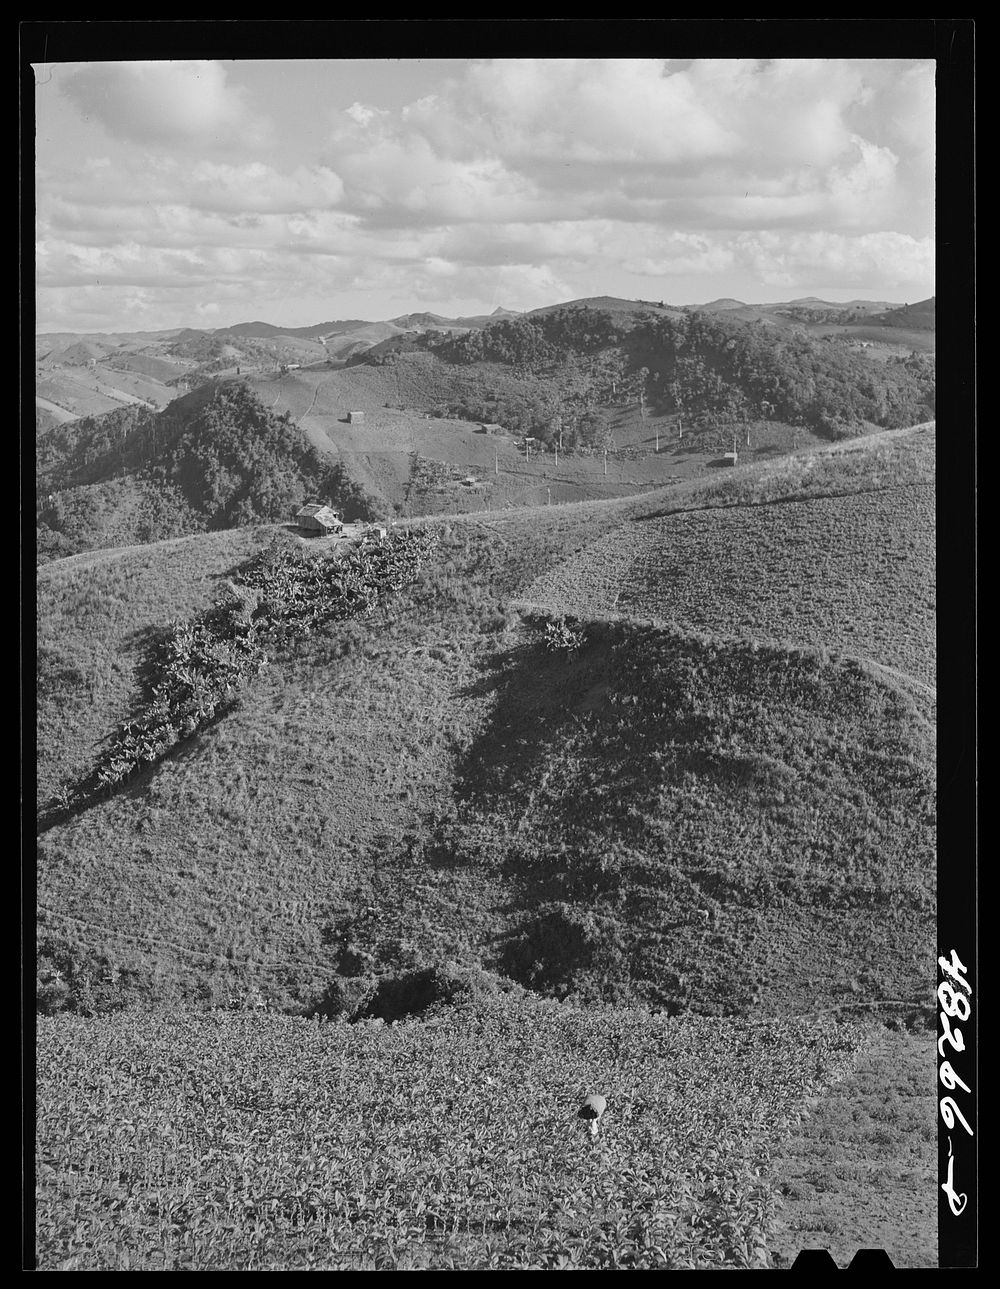 Barranquitas (vicinity), Puerto Rico. Tobacco farms. Sourced from the Library of Congress.